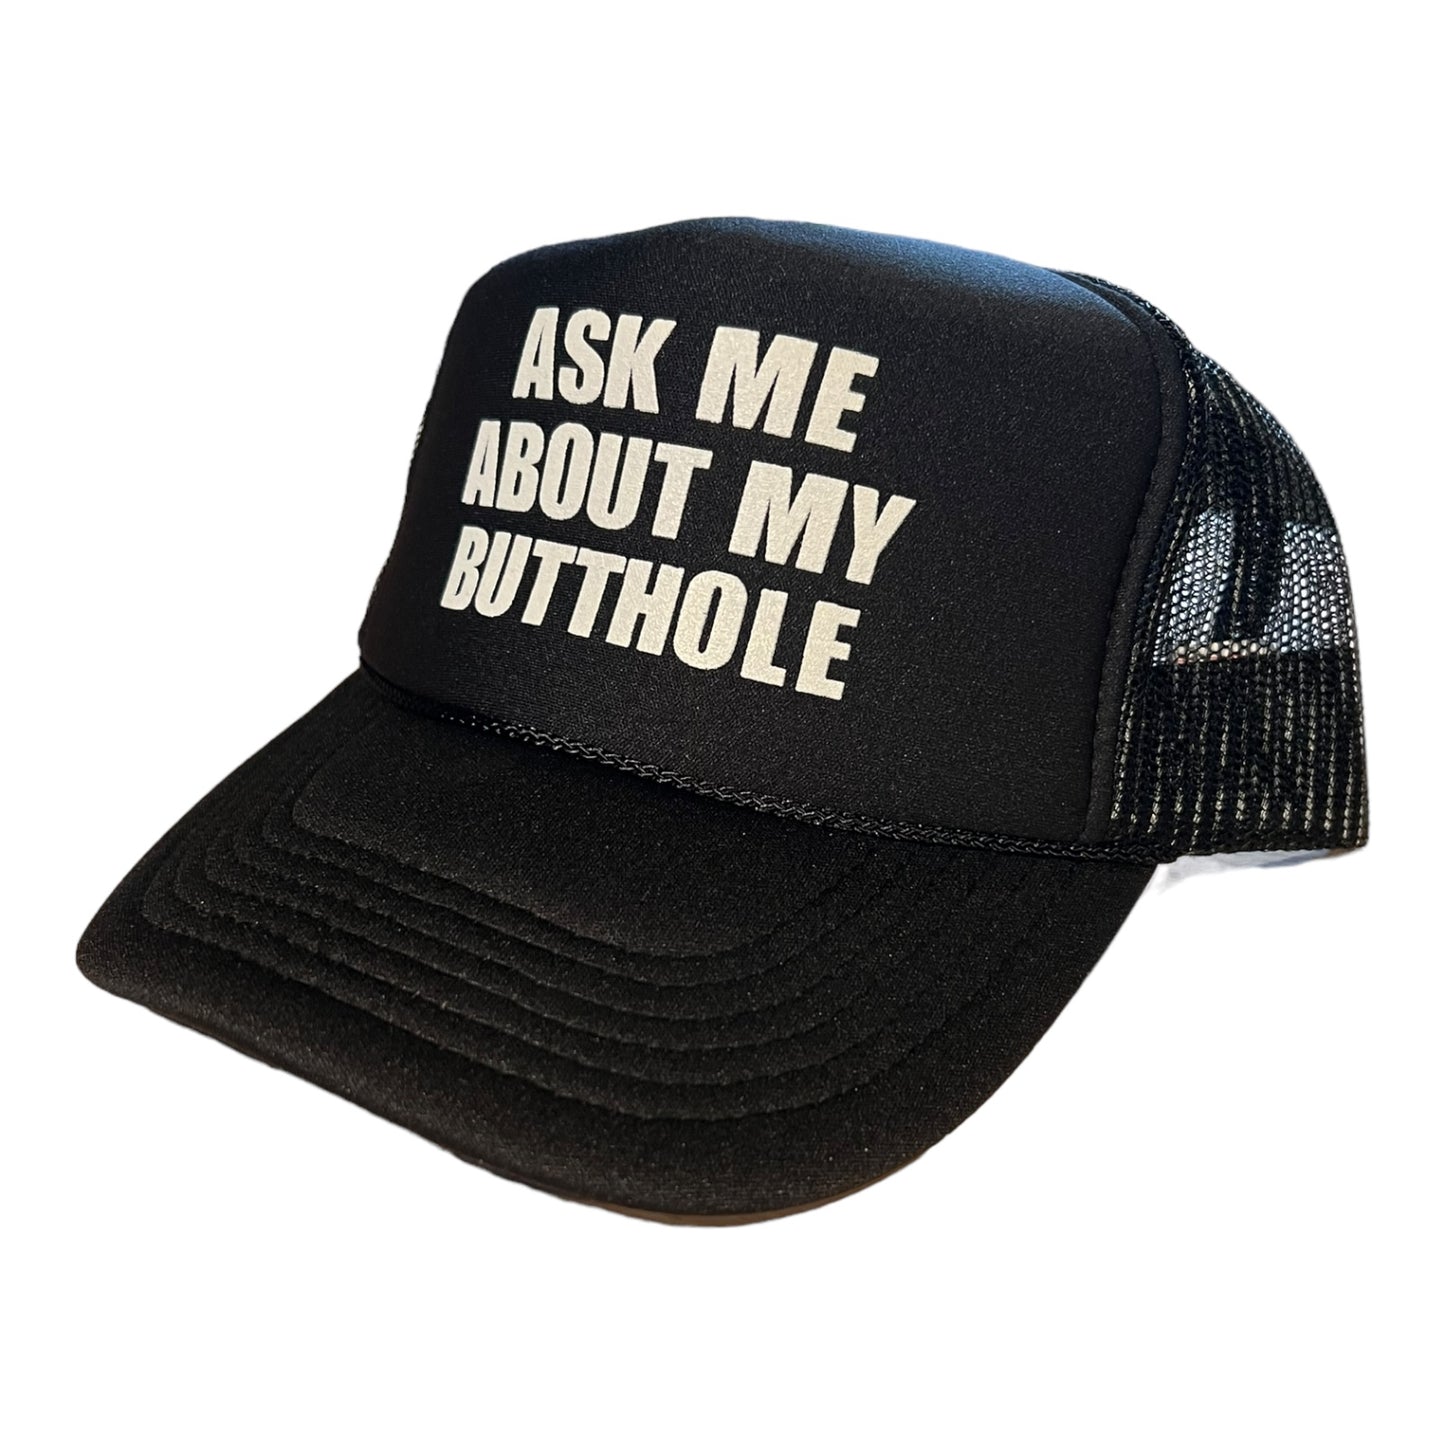 Ask Me About My Butthole Butthole Funny Trucker Hat Black